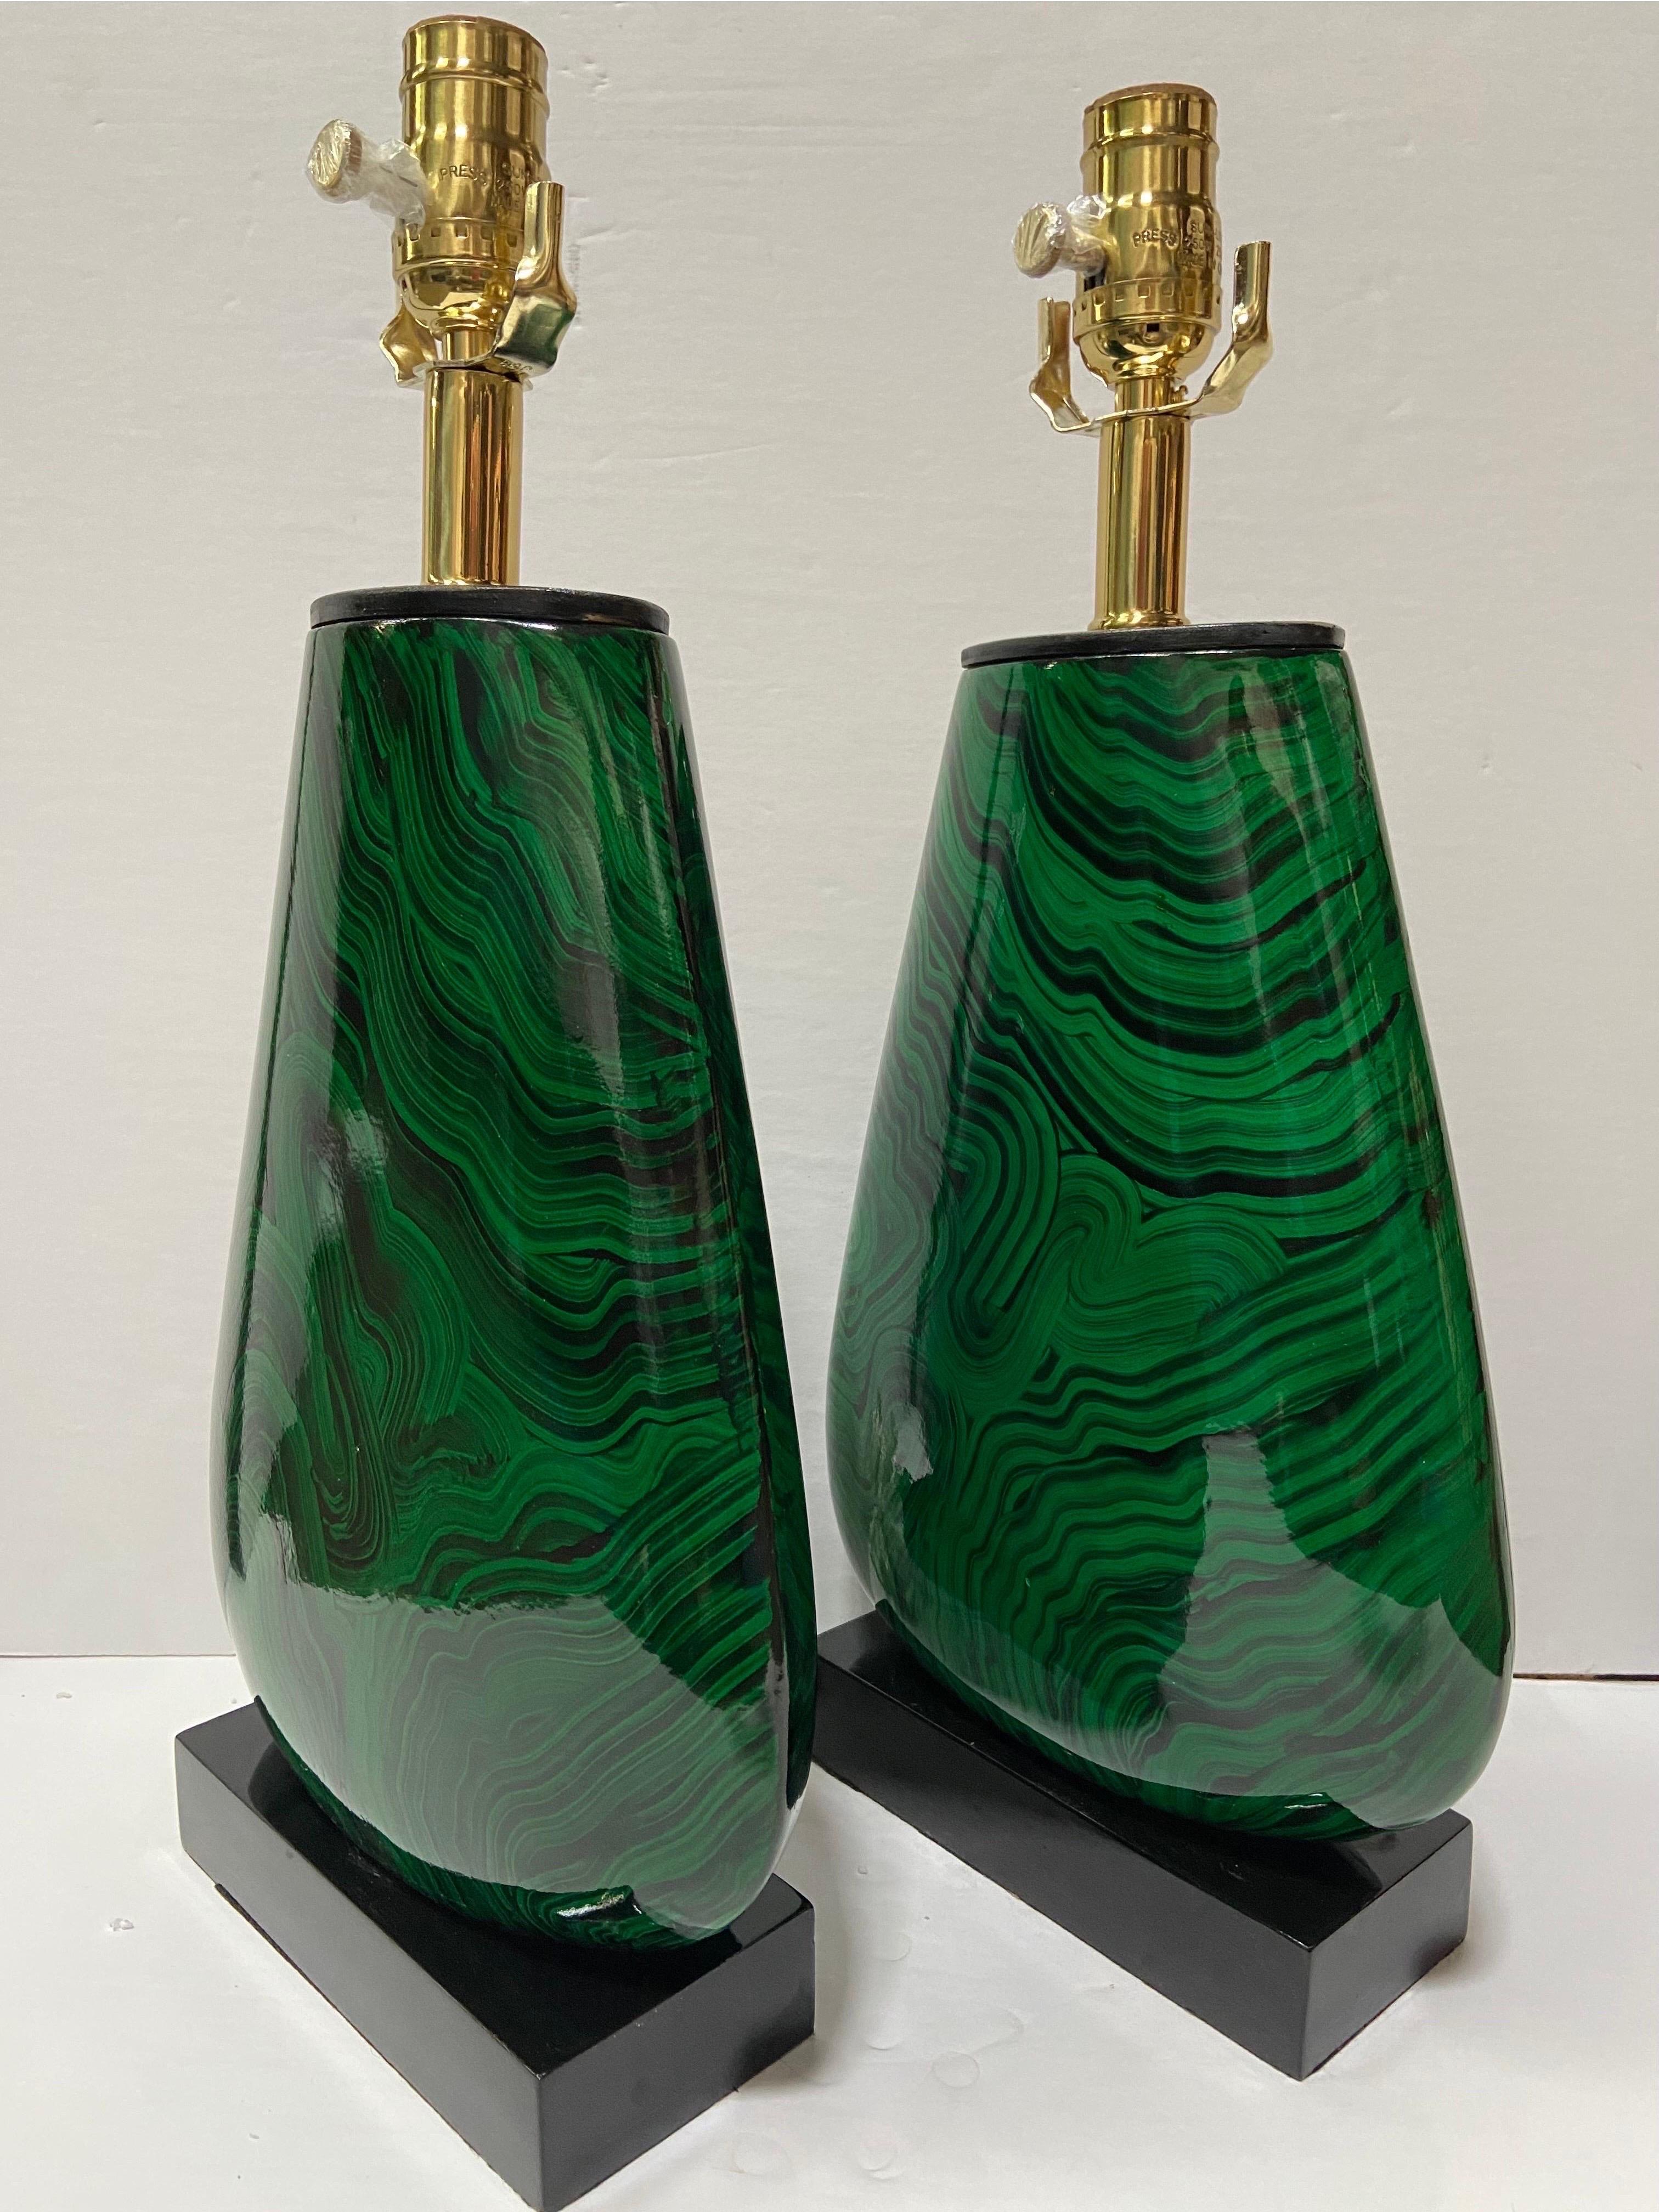 John Richard Faux Malachite Wood Table Lamps, Converted and Wired, a Pair For Sale 4